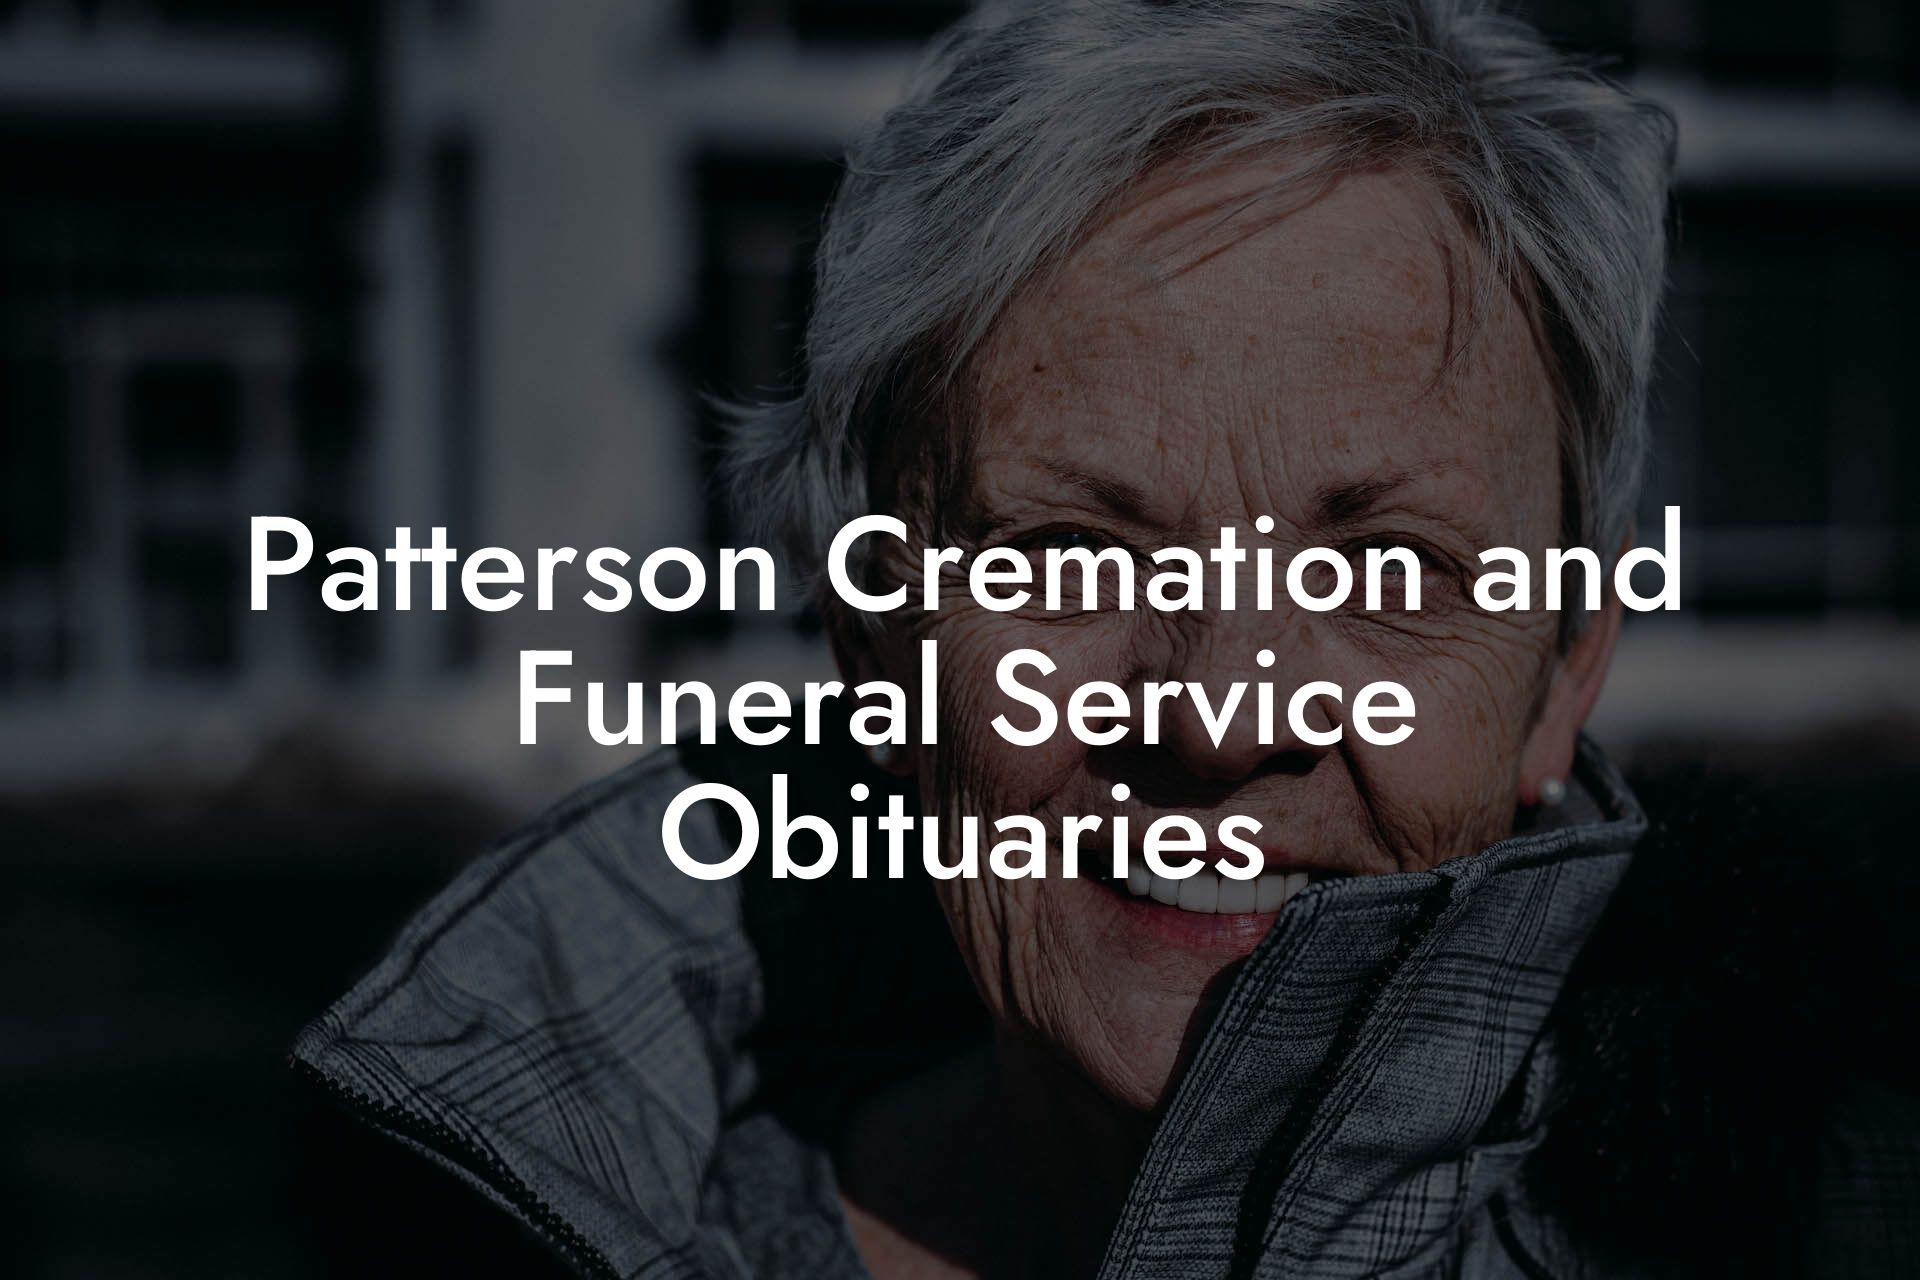 Patterson Cremation and Funeral Service Obituaries